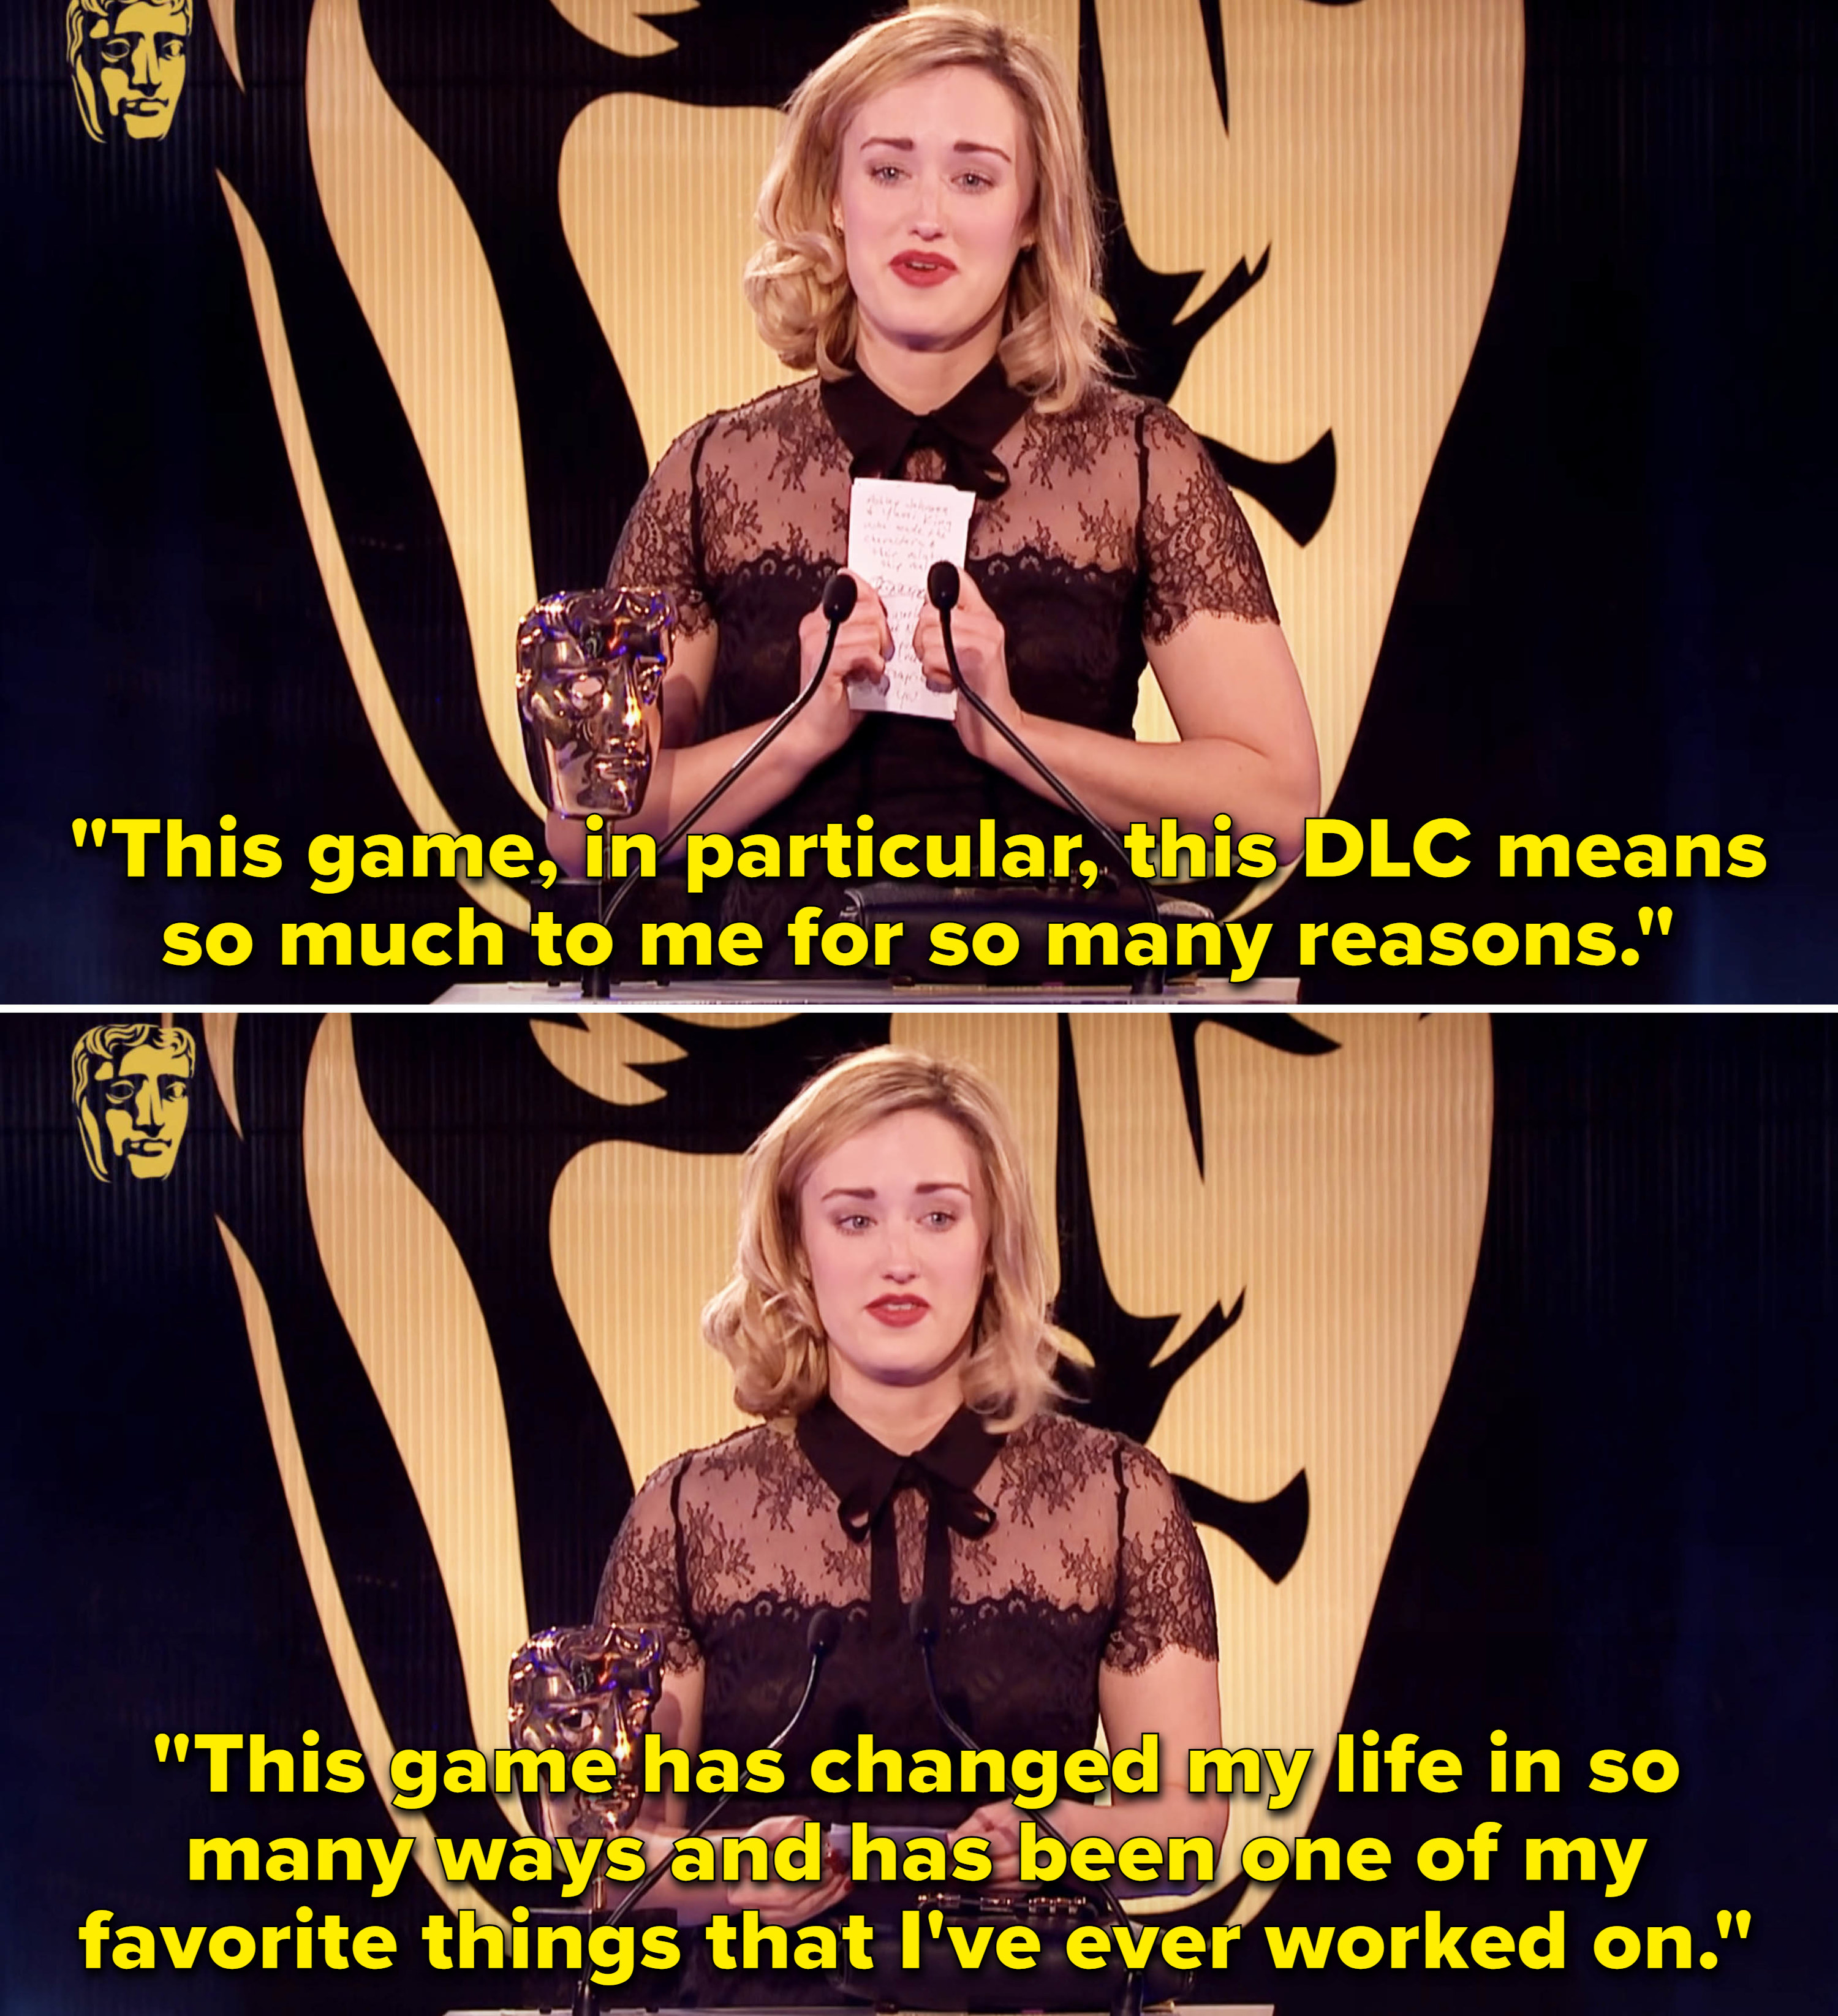 Ashley on the BAFTAs stage talking about how much the game has changed her life